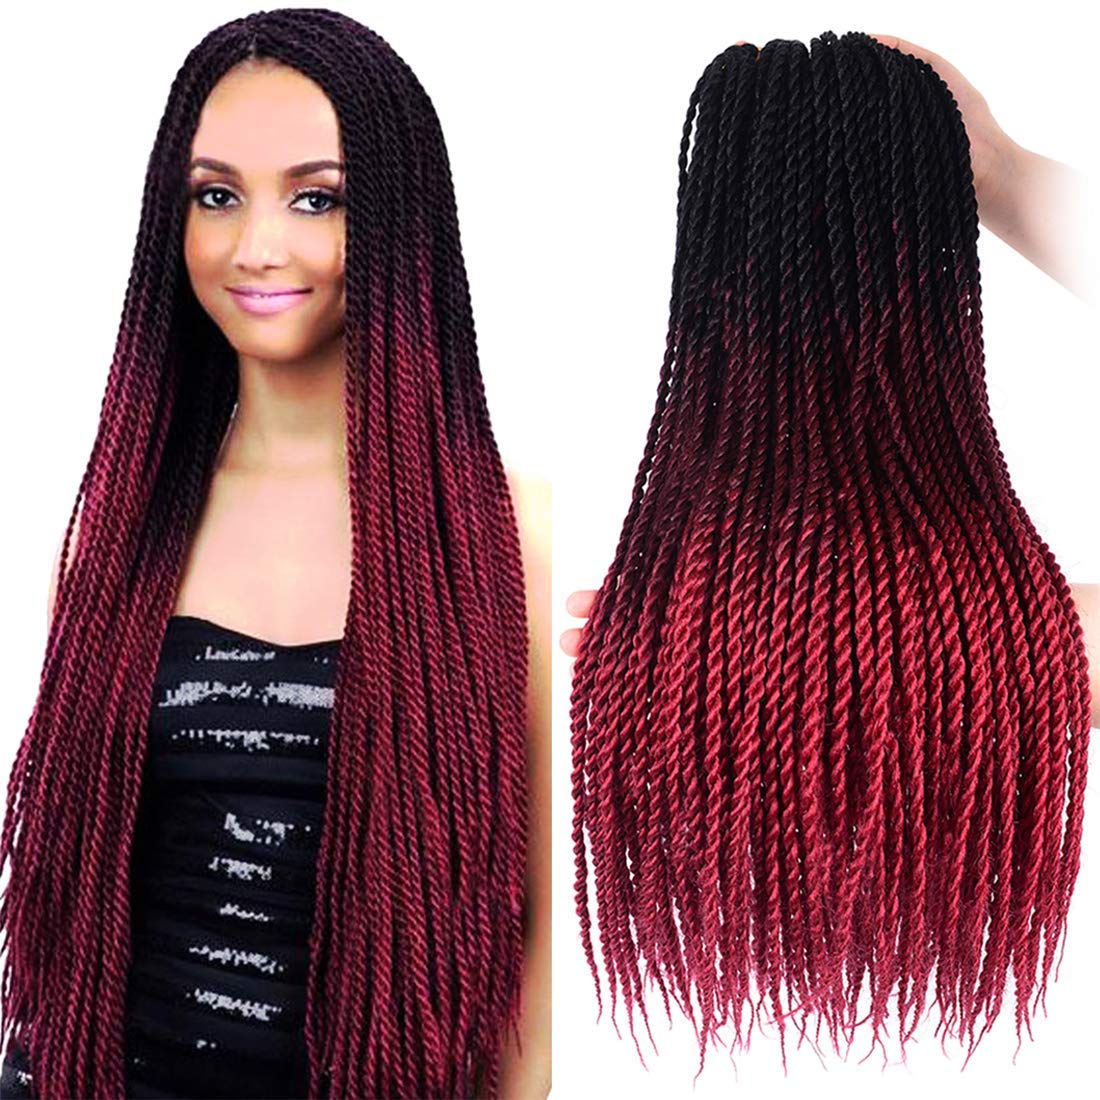 12 Ombre Style Crochet Braids with Great Reviews. Plus How to Install ...